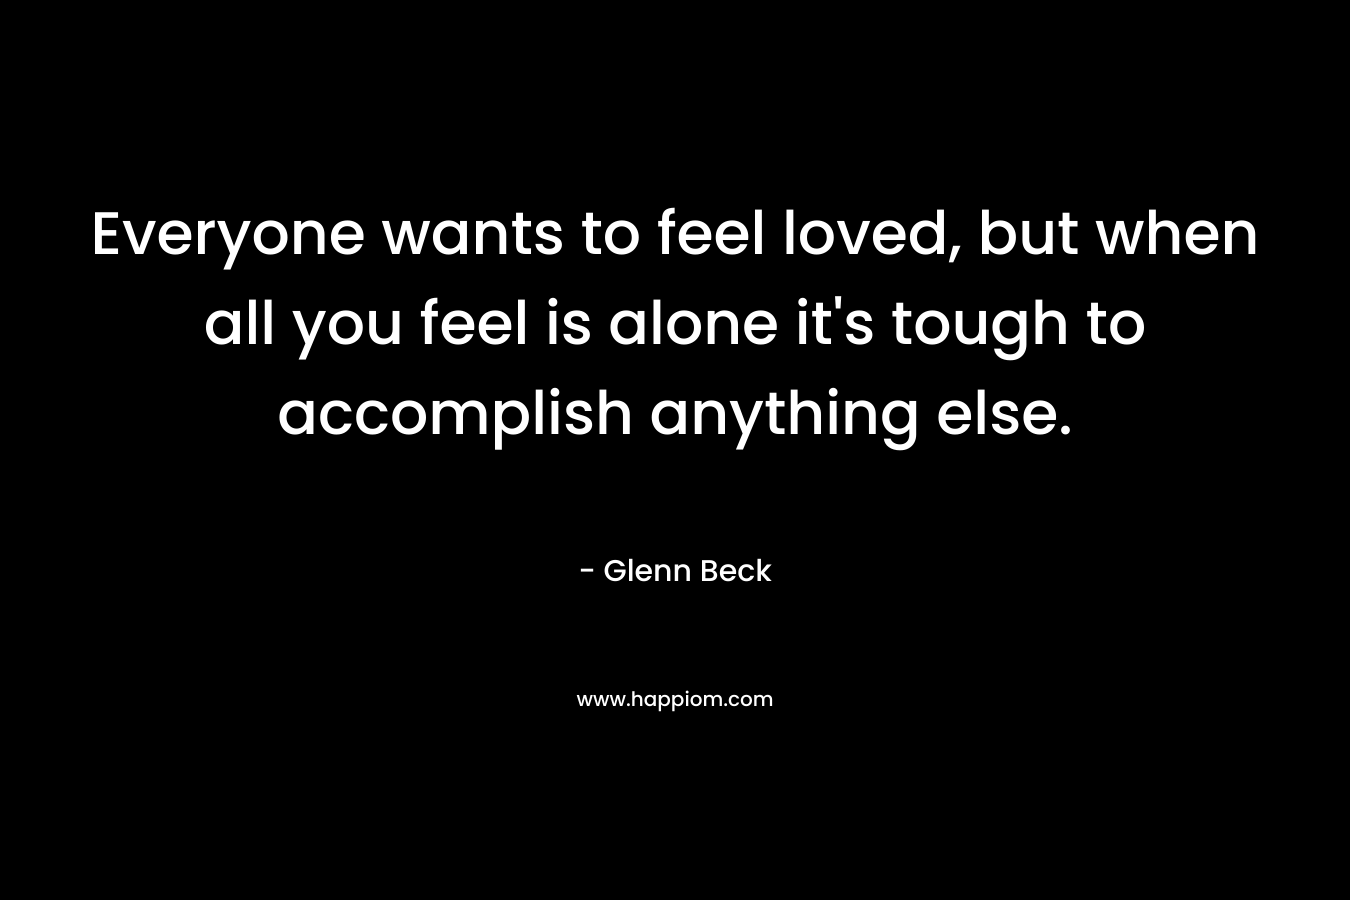 Everyone wants to feel loved, but when all you feel is alone it’s tough to accomplish anything else. – Glenn Beck